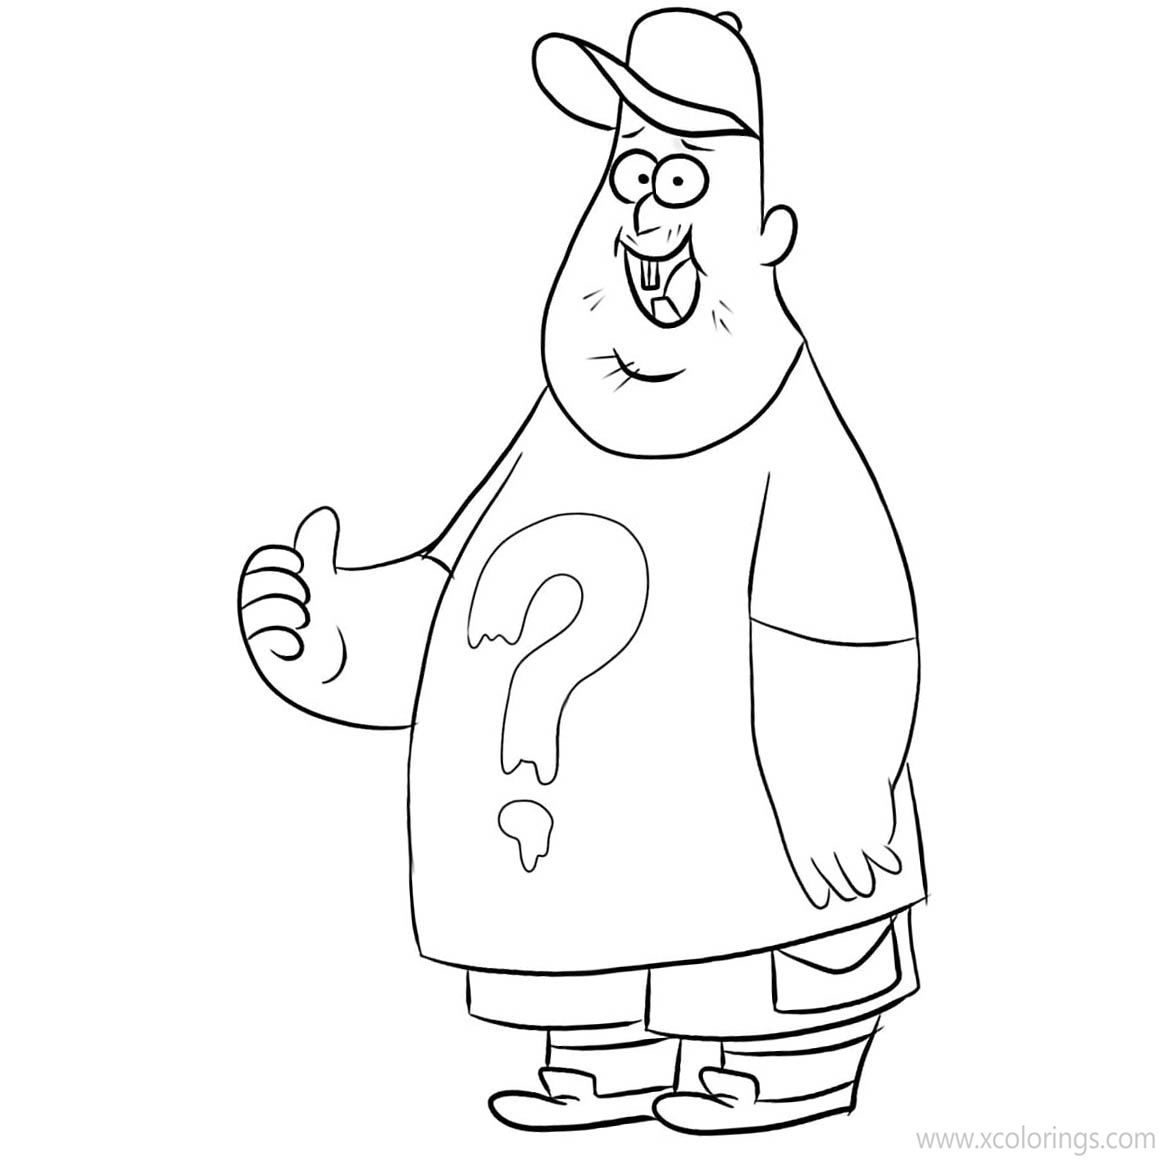 Free Soos Ramirez from Gravity Falls Coloring Pages printable